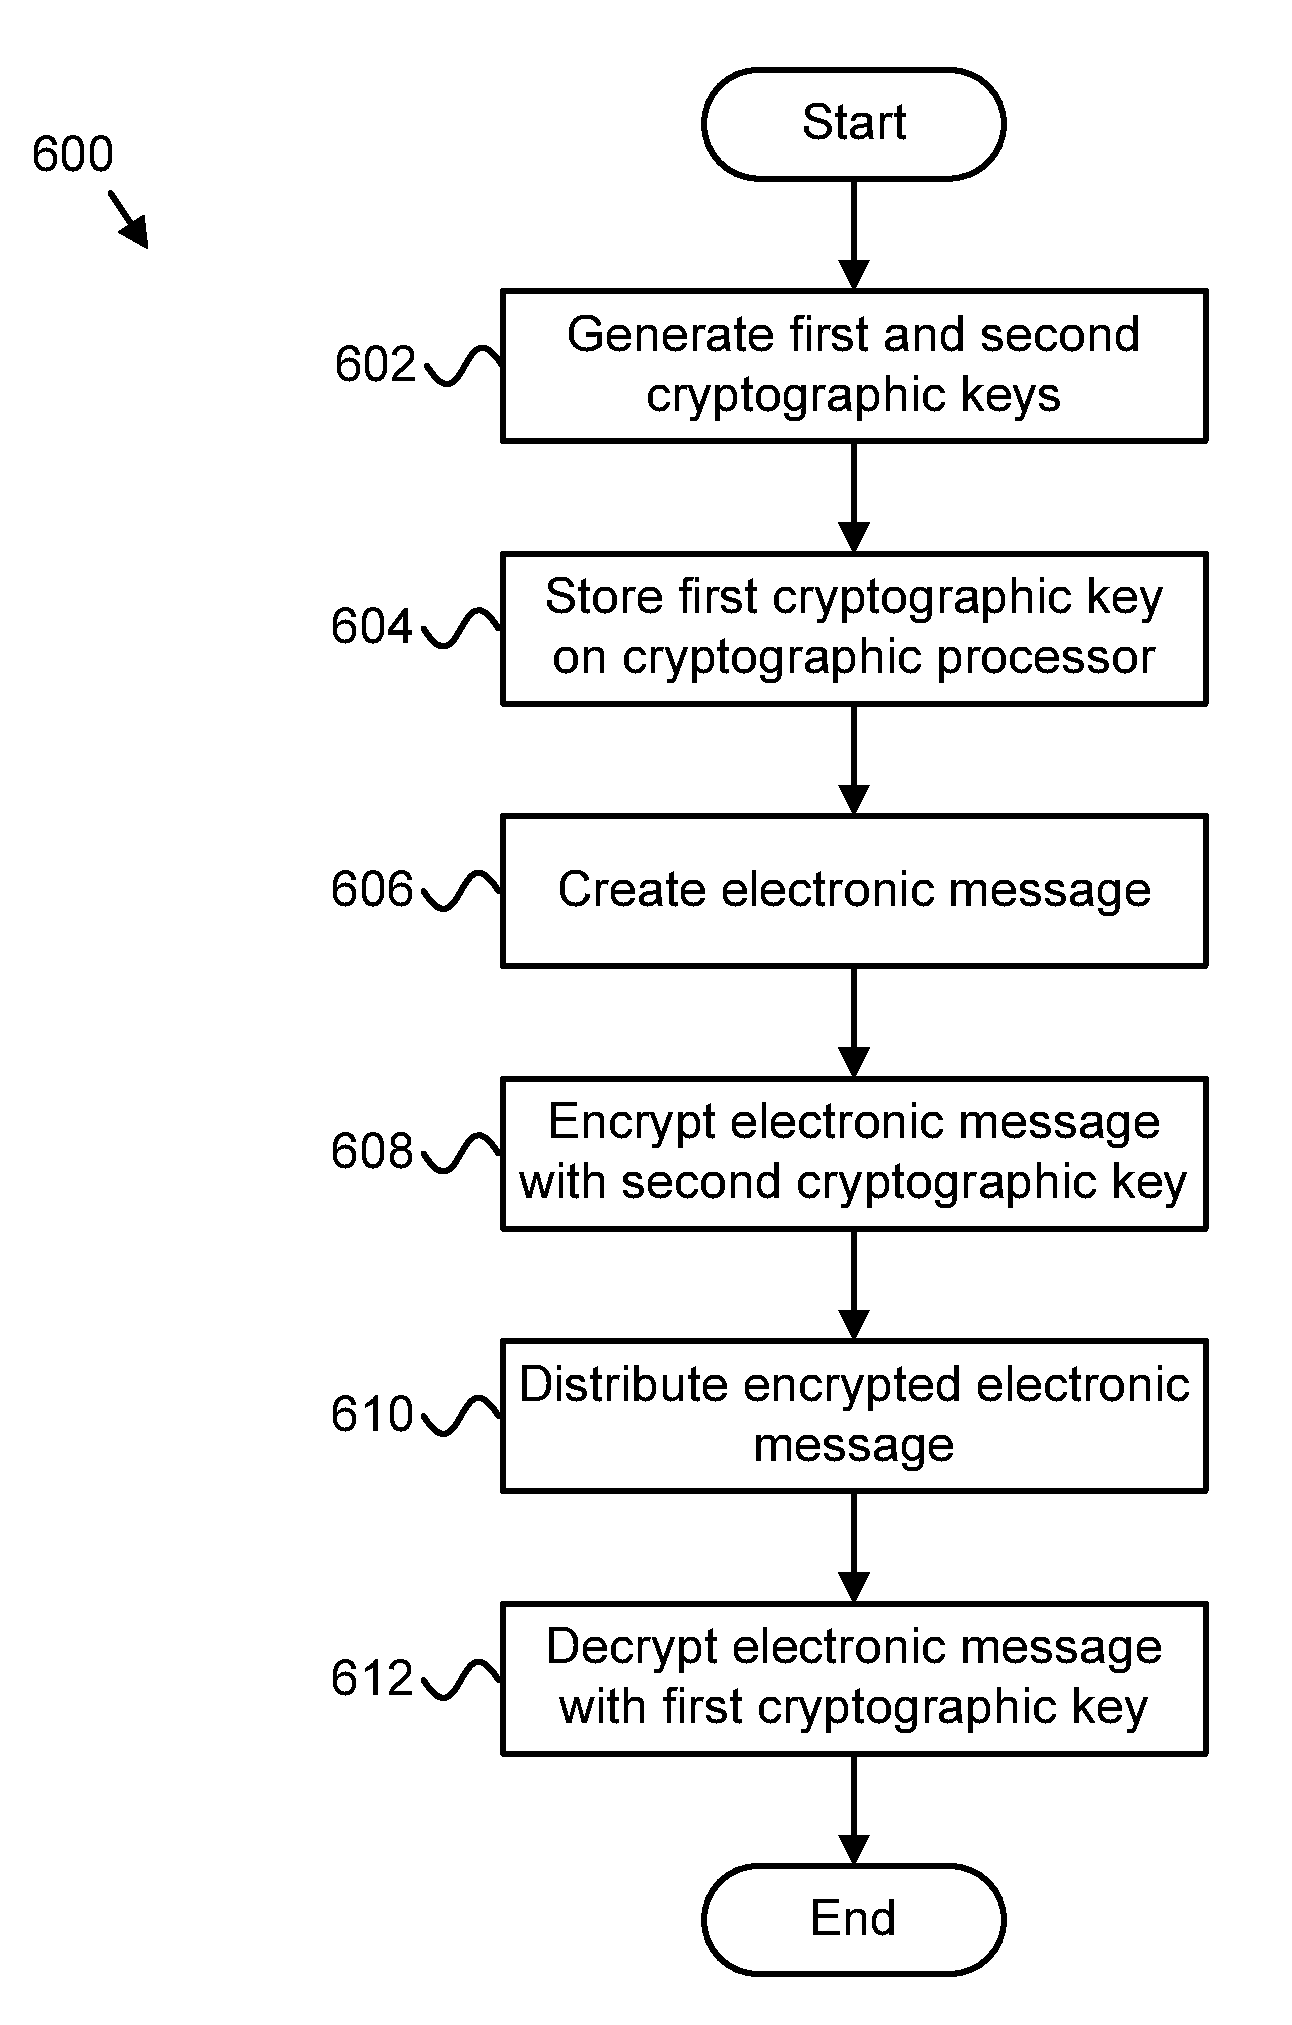 Pre-boot authentication using a cryptographic processor